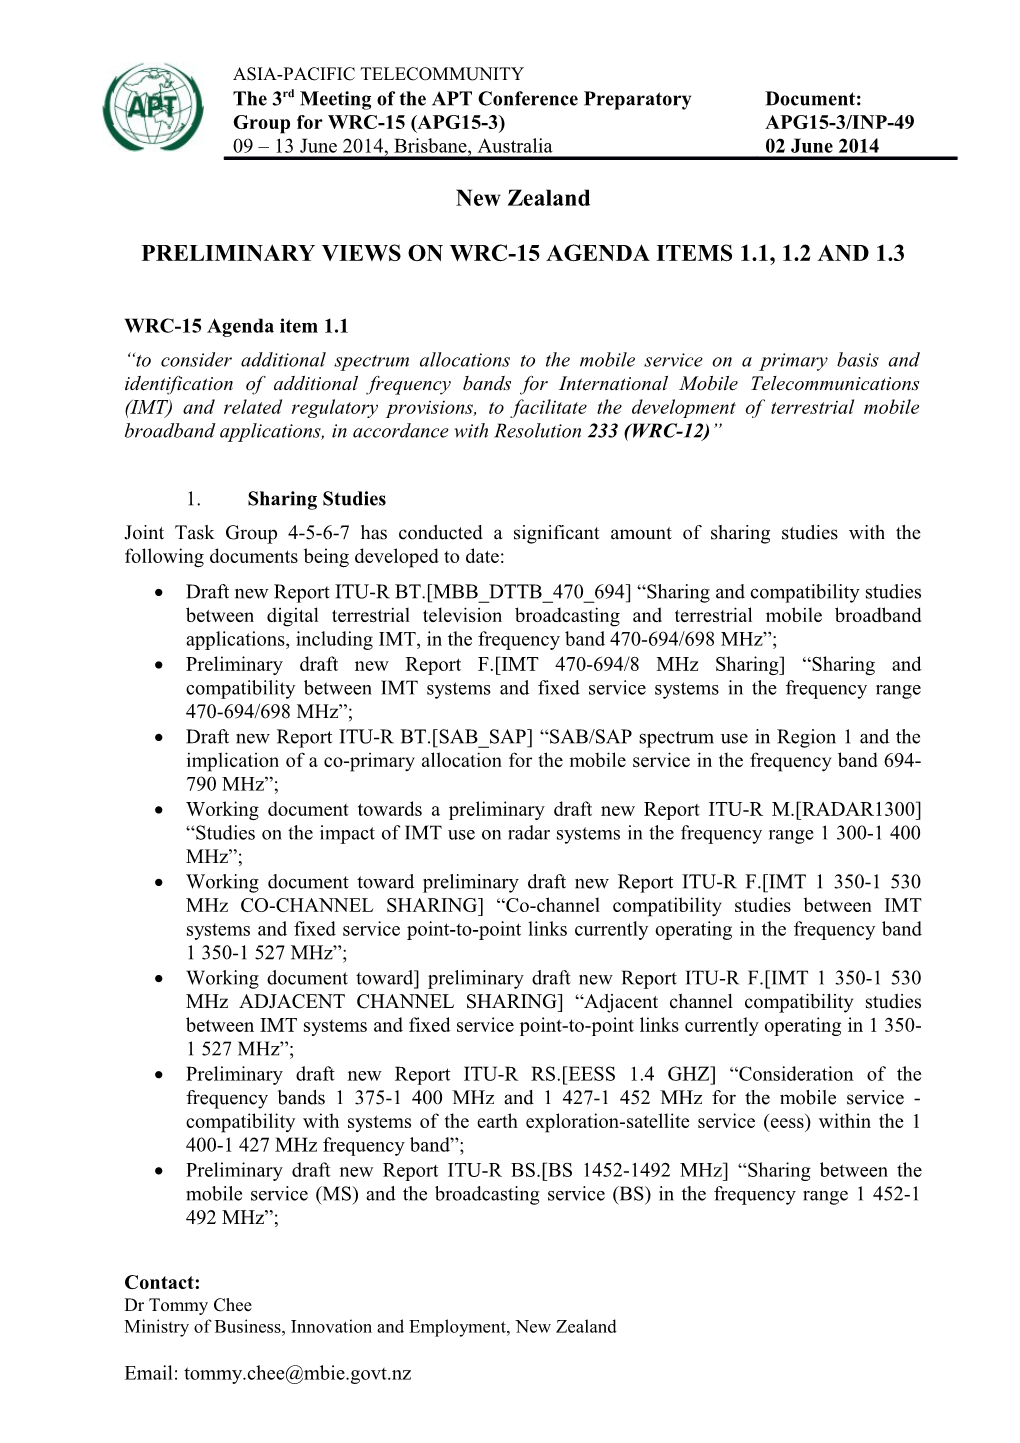 PRELIMINARY VIEWS on WRC-15 AGENDA ITEMS 1.1, 1.2 and 1.3